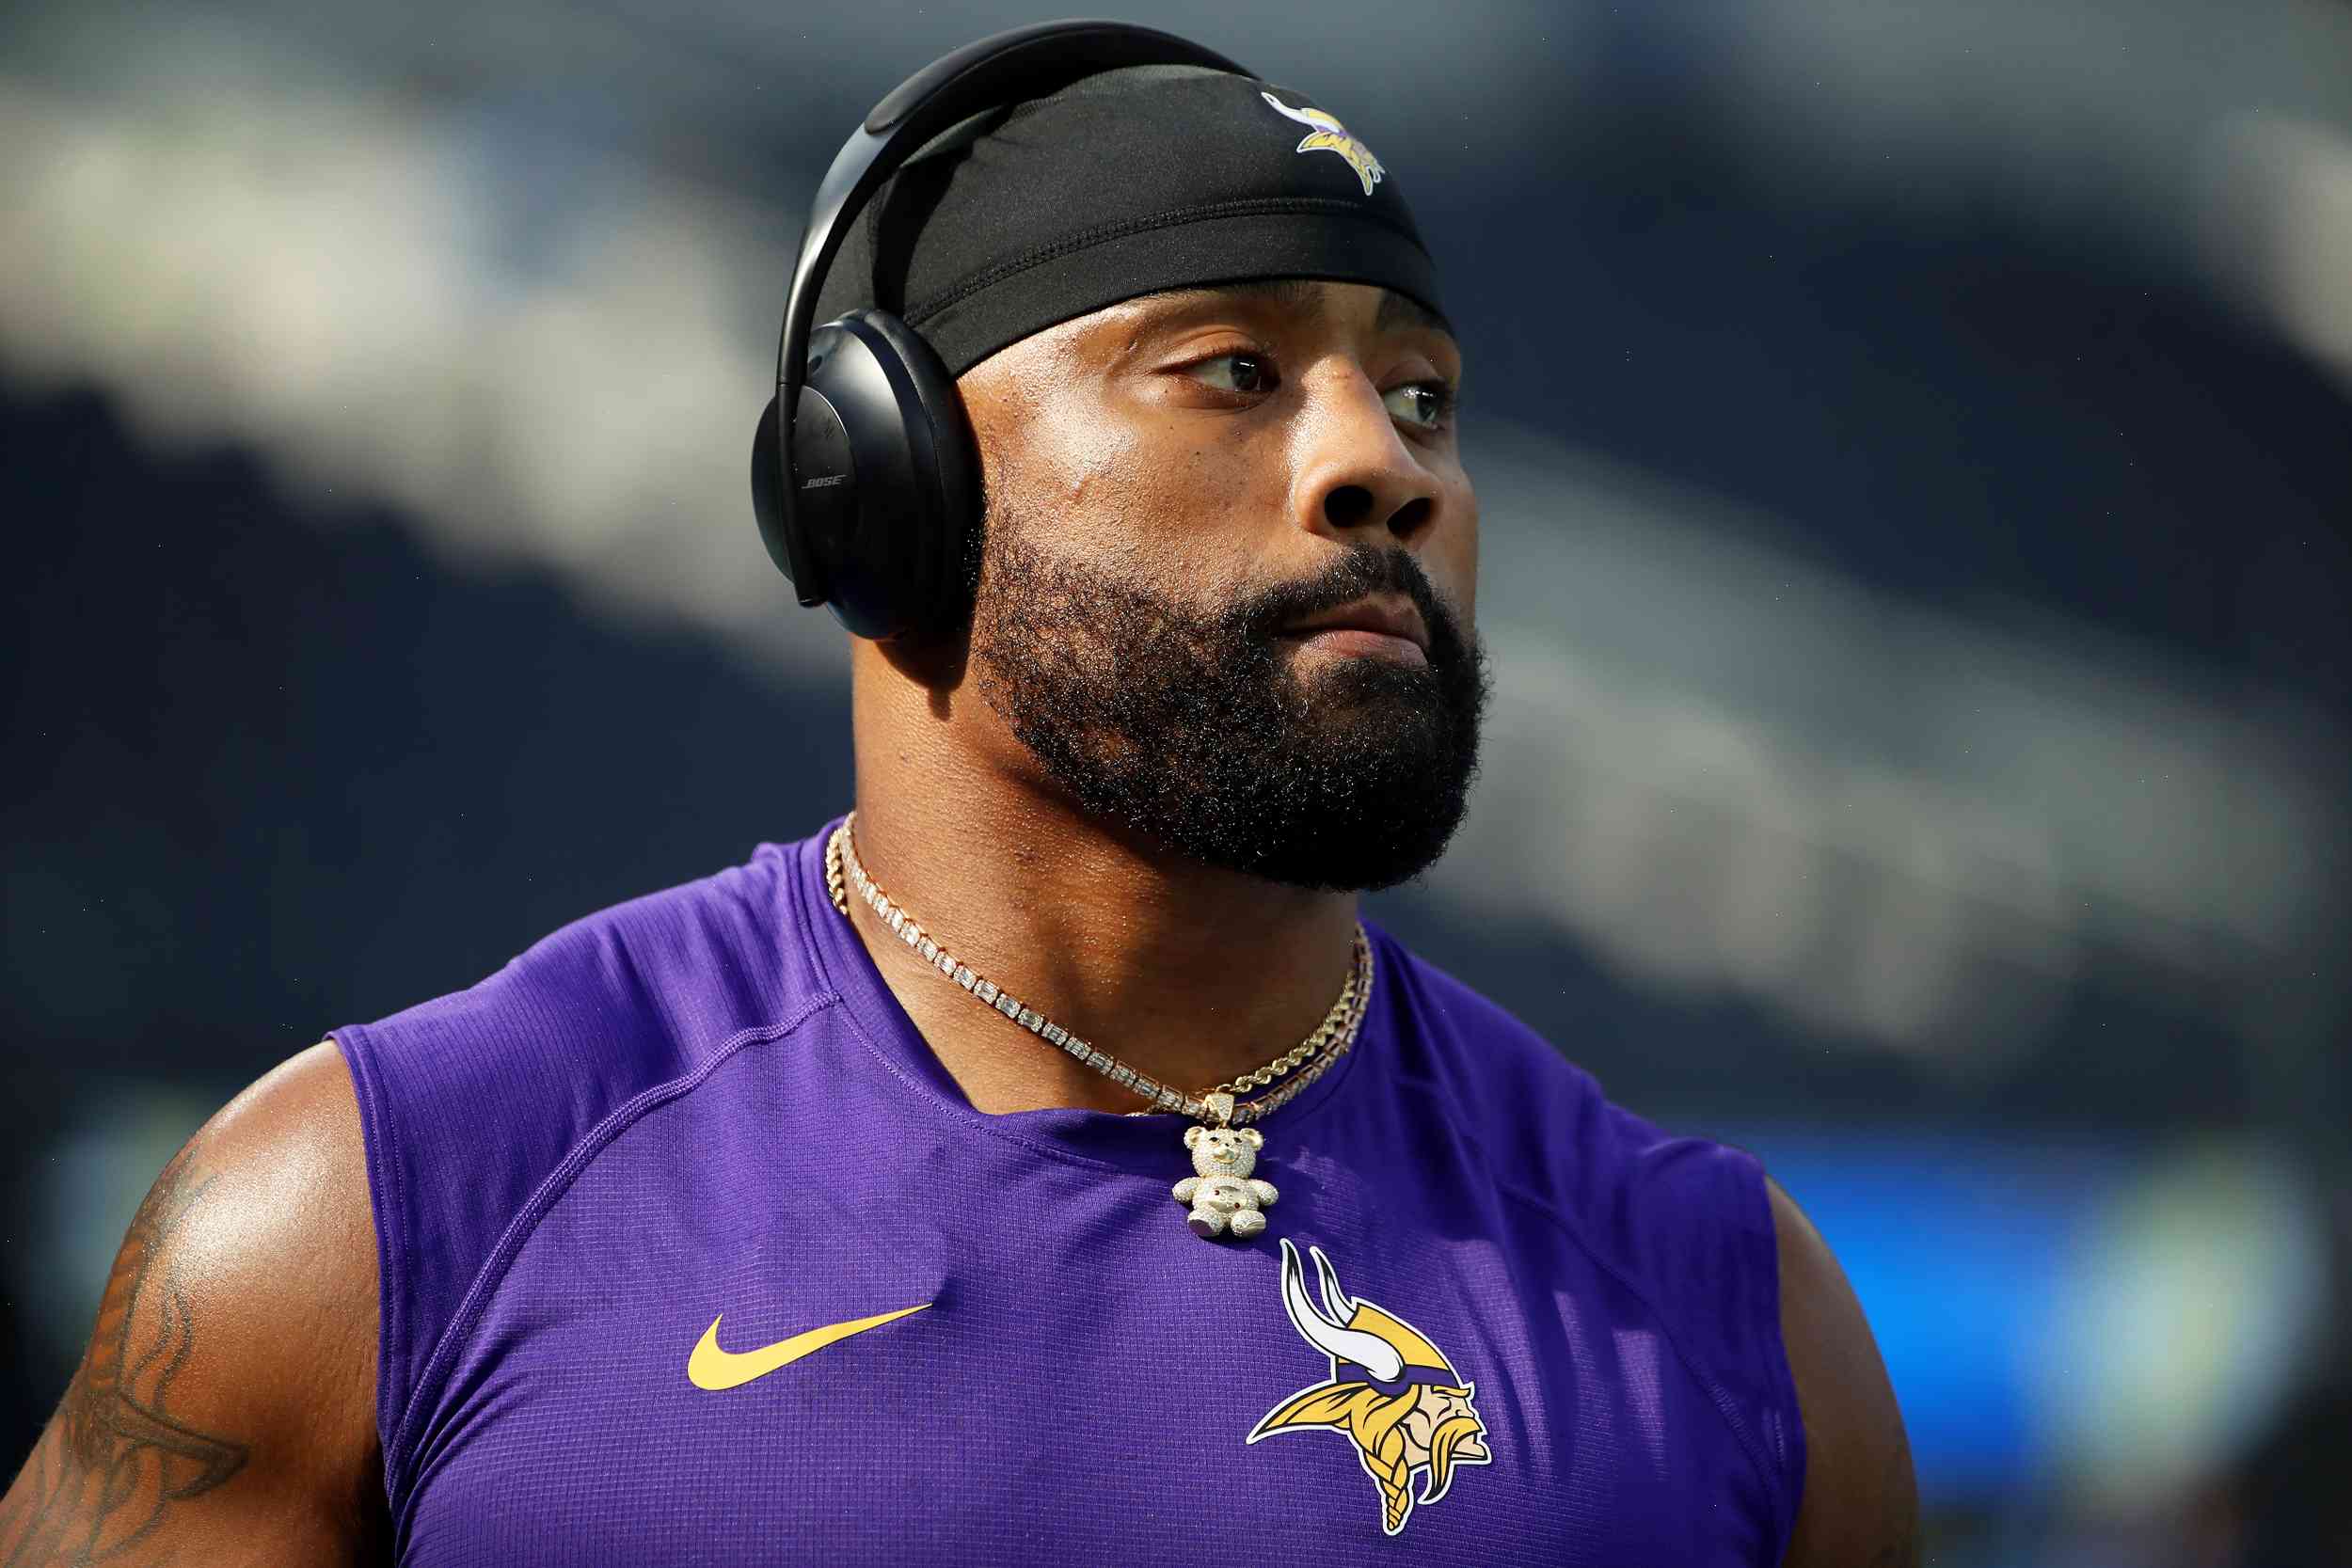 Vikings player allegedly robbed at his own home